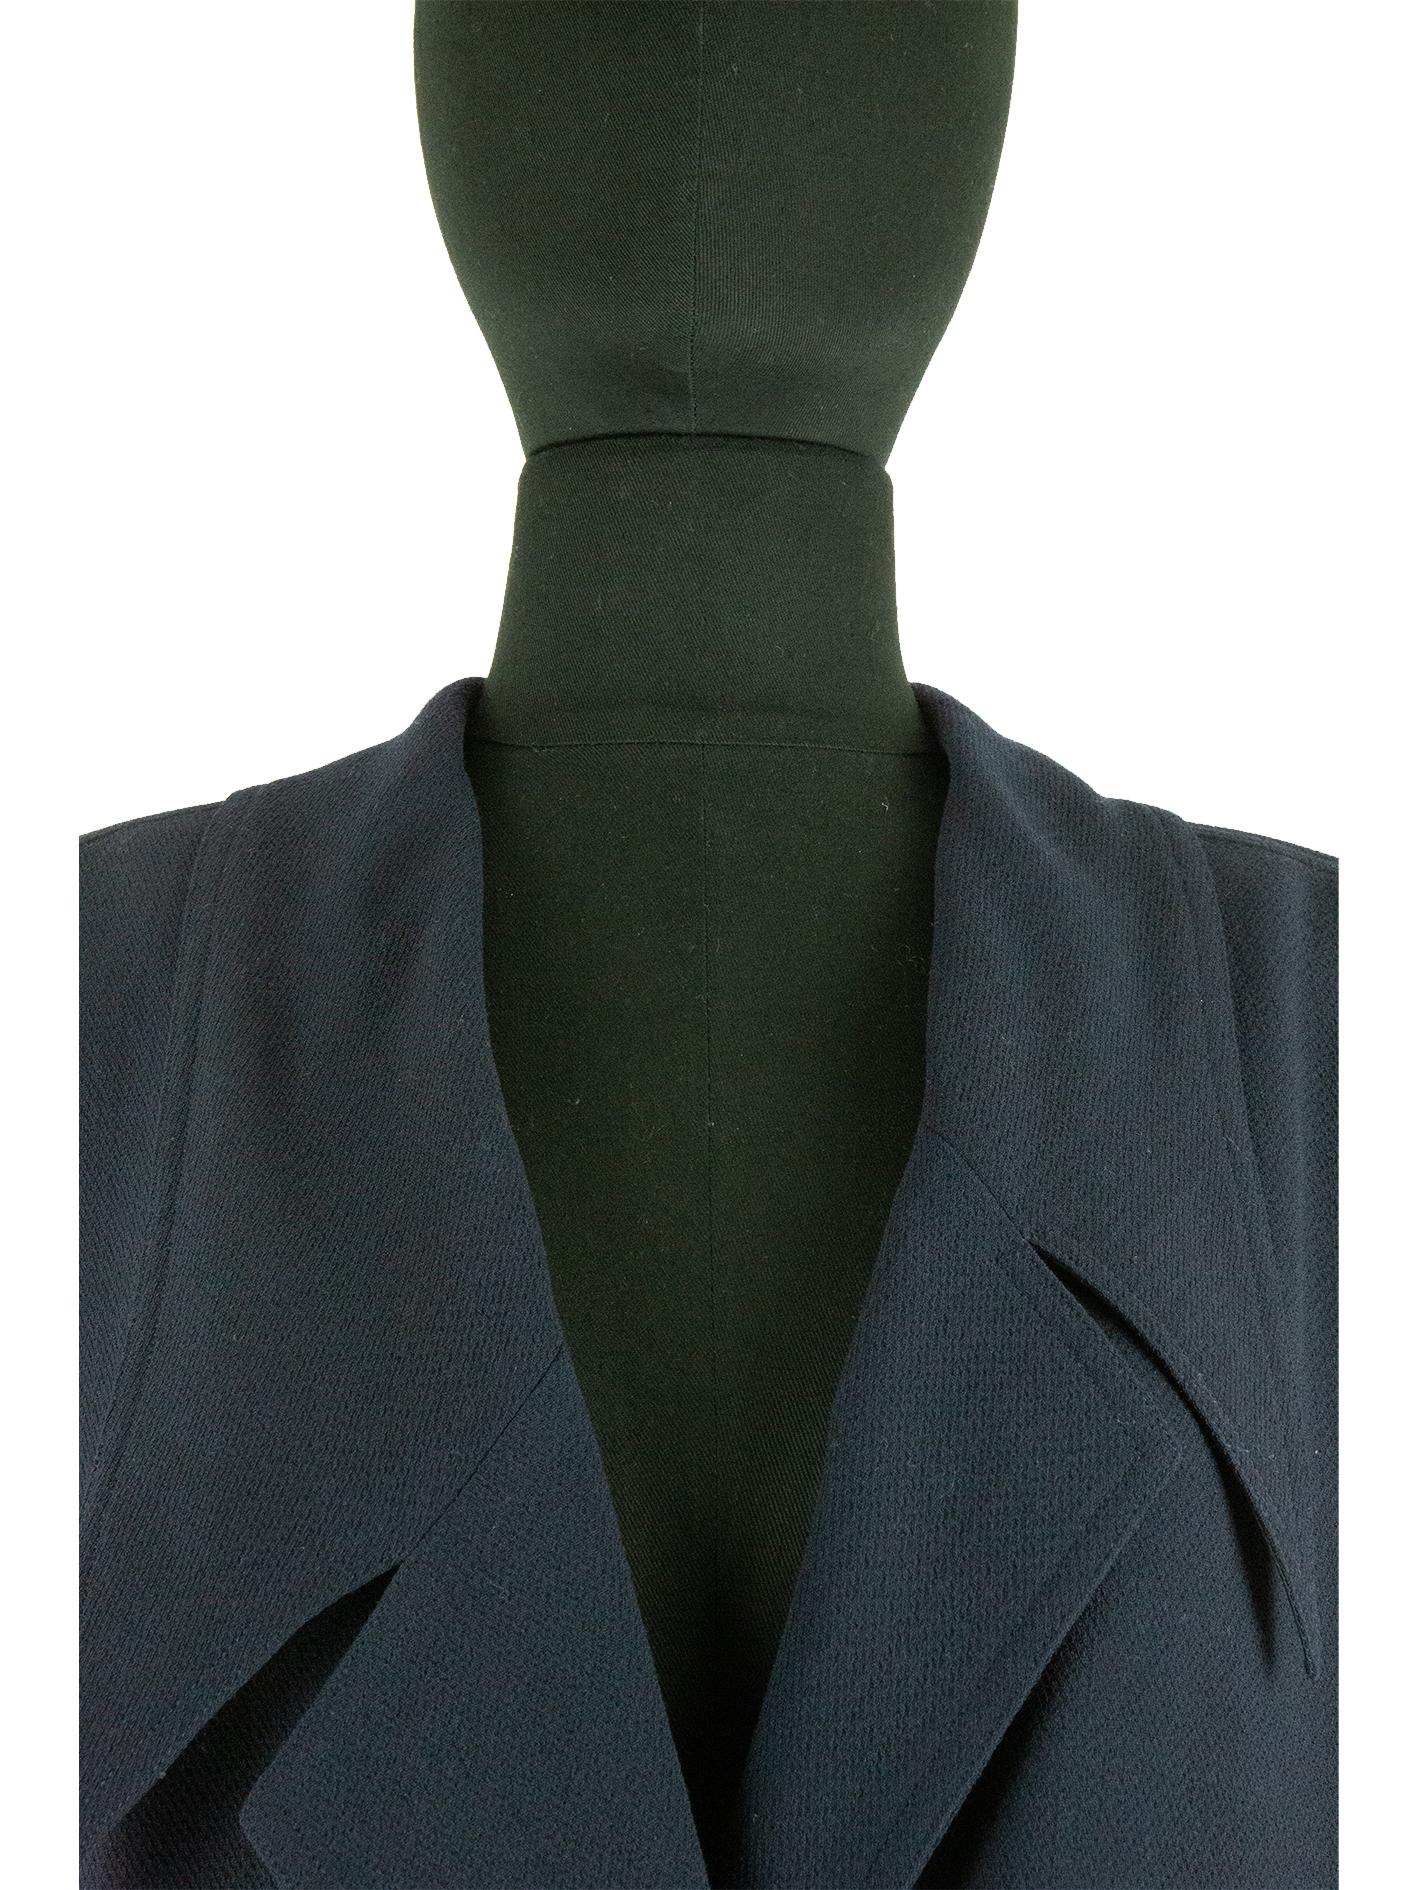 A late 1980s Largerfeld period Chanel jacket with an asymmetrical hemline. Crossing over from the right side over the left with the right side being the shorter of the two and joining together with two rows of two hook and eye fastenings and one